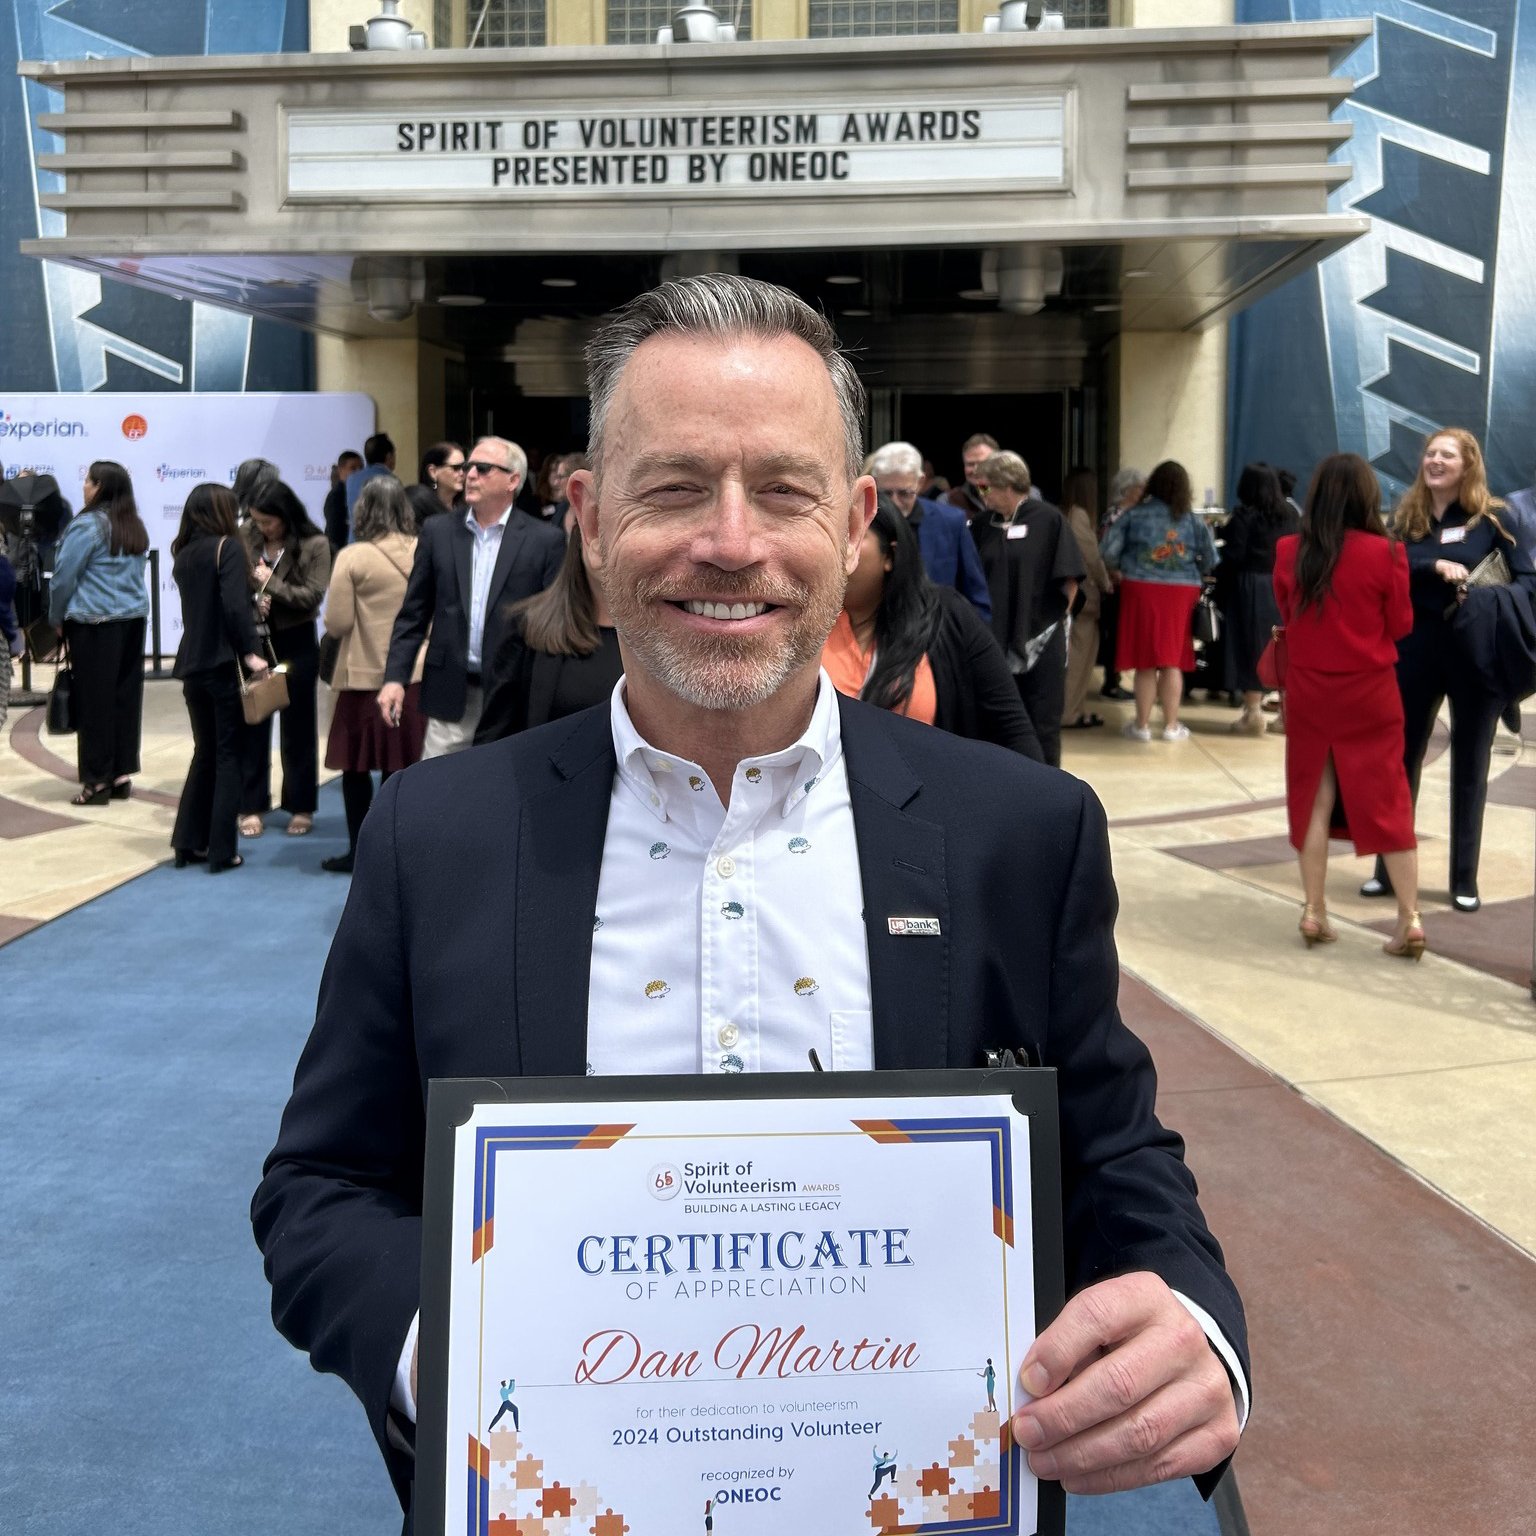 This week, MenAlive's Treasurer and CFO, Dan Martin, was awarded @weareoneoc's Spirit of Volunteerism award! 🎉 We couldn't be happier to have Dan's volunteerism recognized. His countless hours devoted to MenAlive are unmeasurable. Thank you, Dan!

#